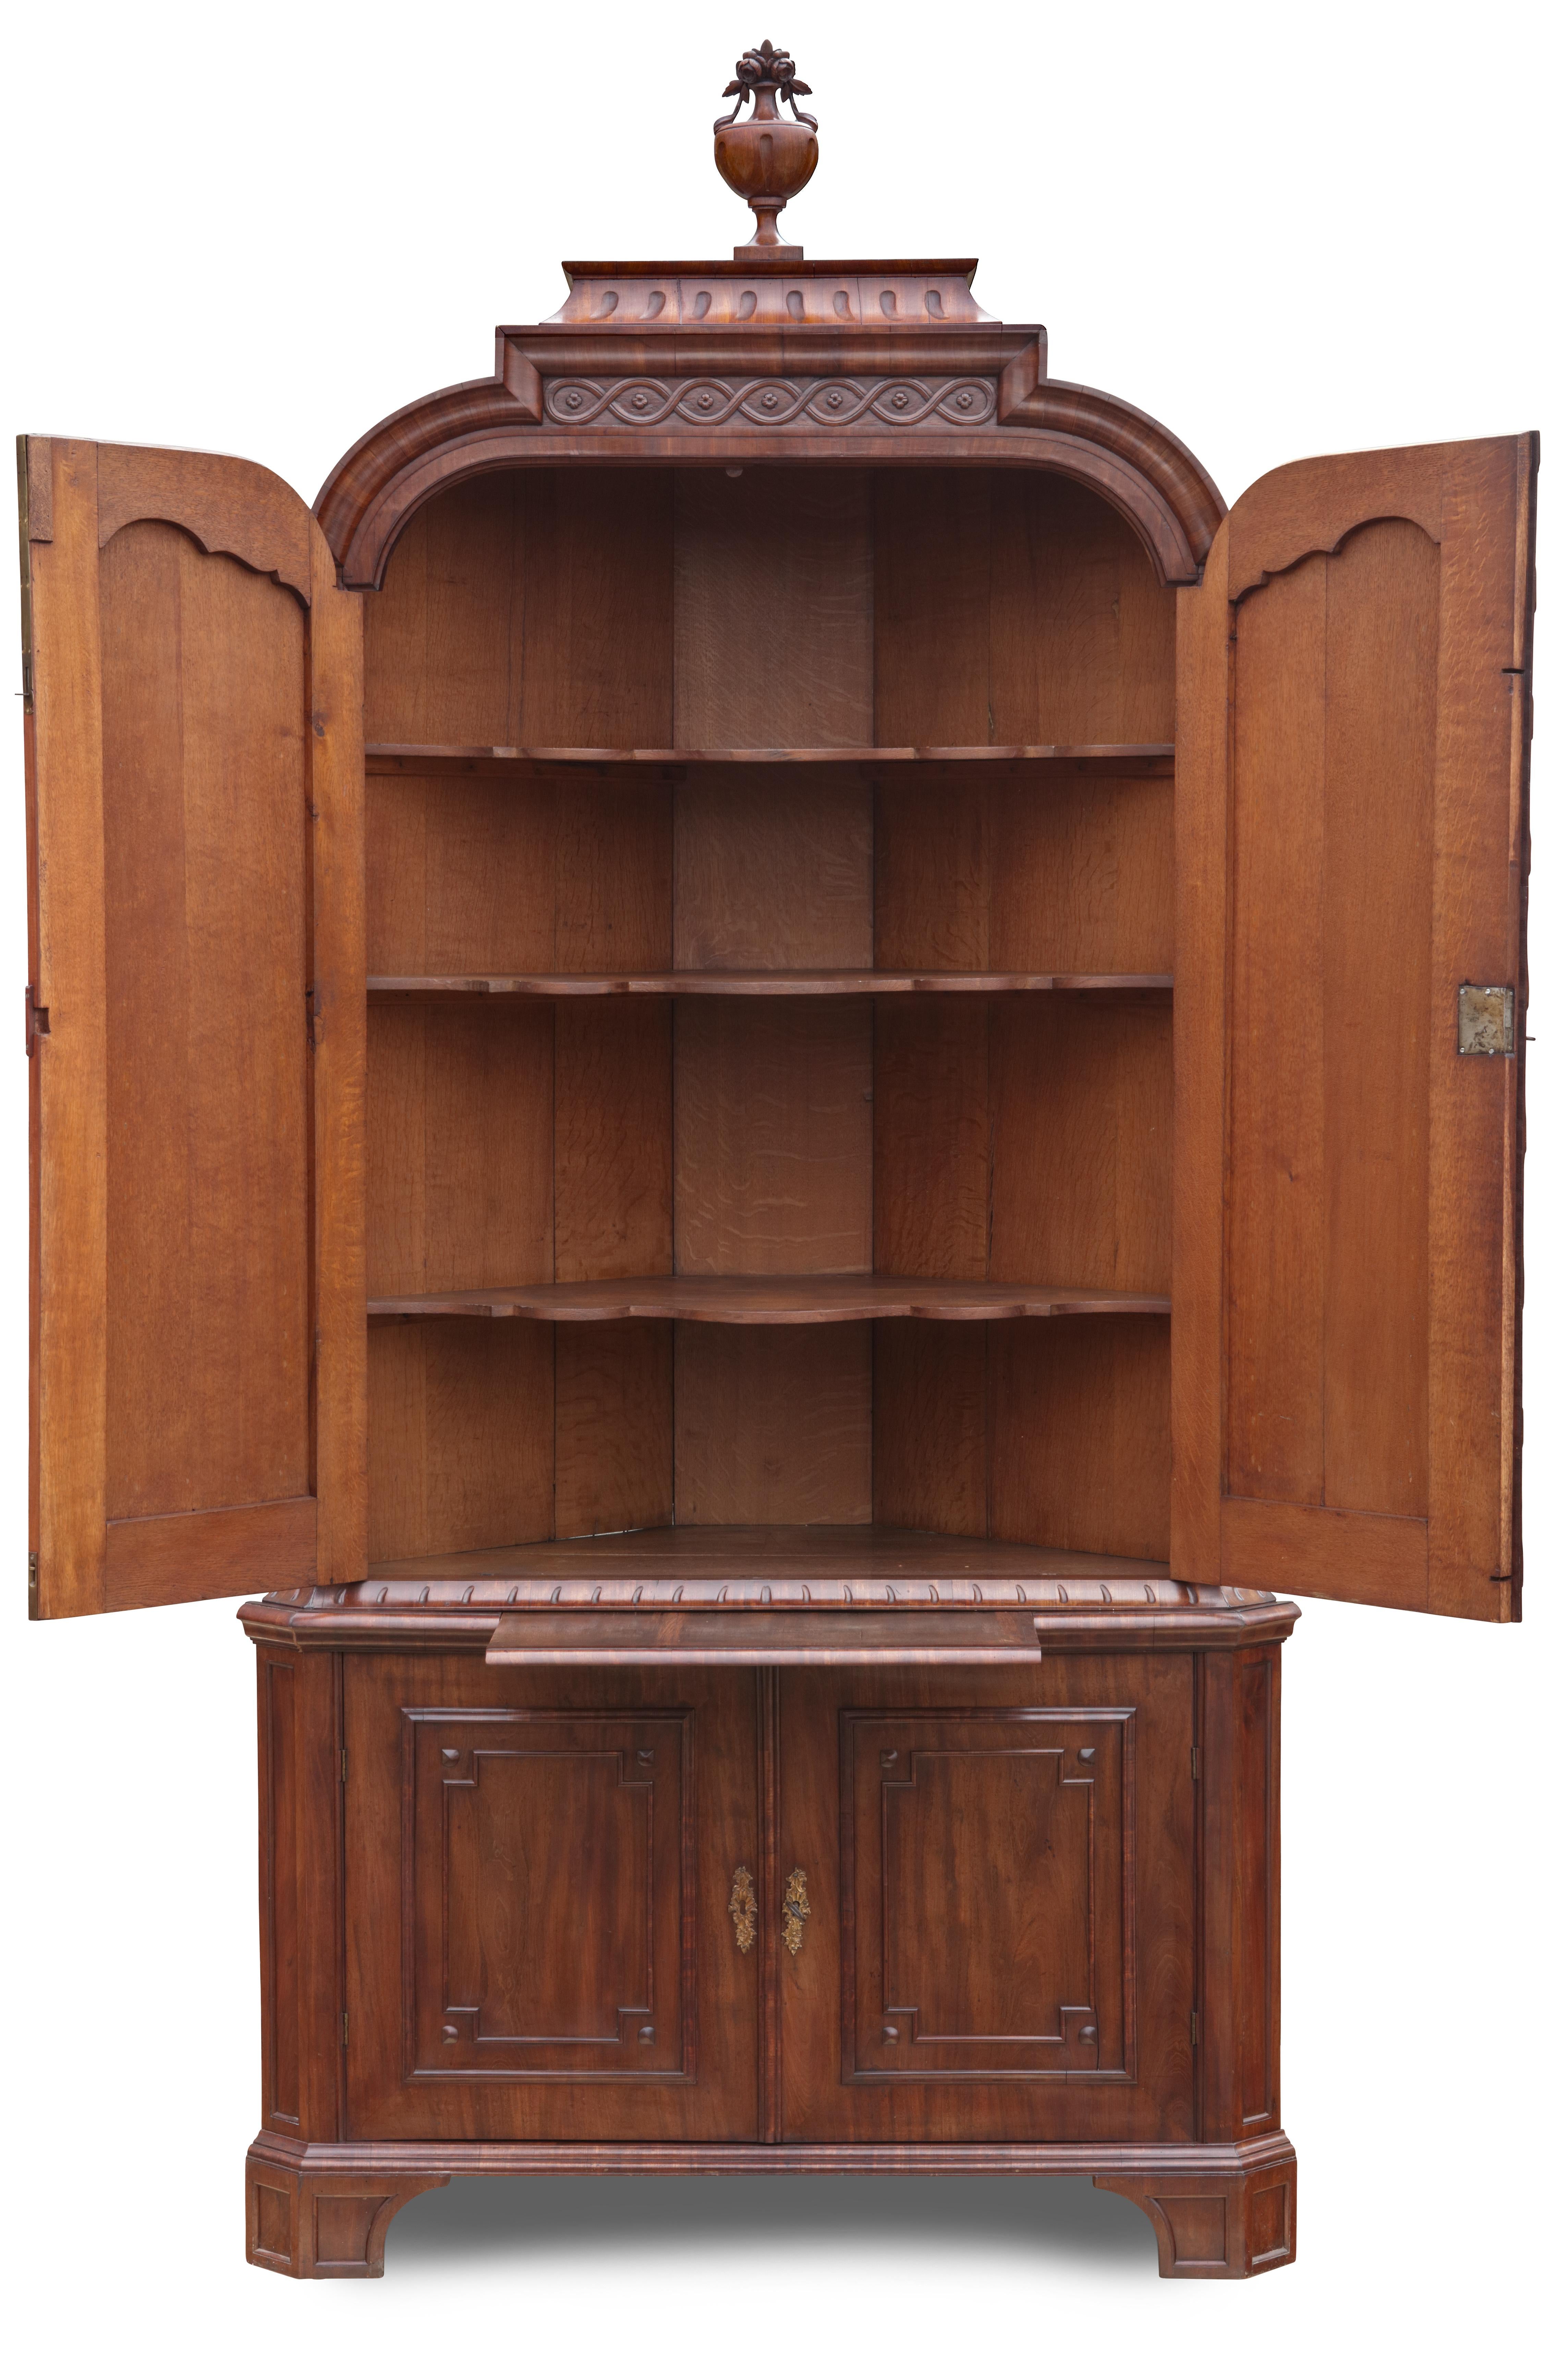 Corner cabinet, The Hague circa 1775
Dimensions: 270 cm high, 132 cm wide, and 72 cm deep.
Oak core veneered with mahogany, gilded bronze fittings.
Provenance: Passed down from generation to generation in a The Hague family until 2003.
Sotheby's